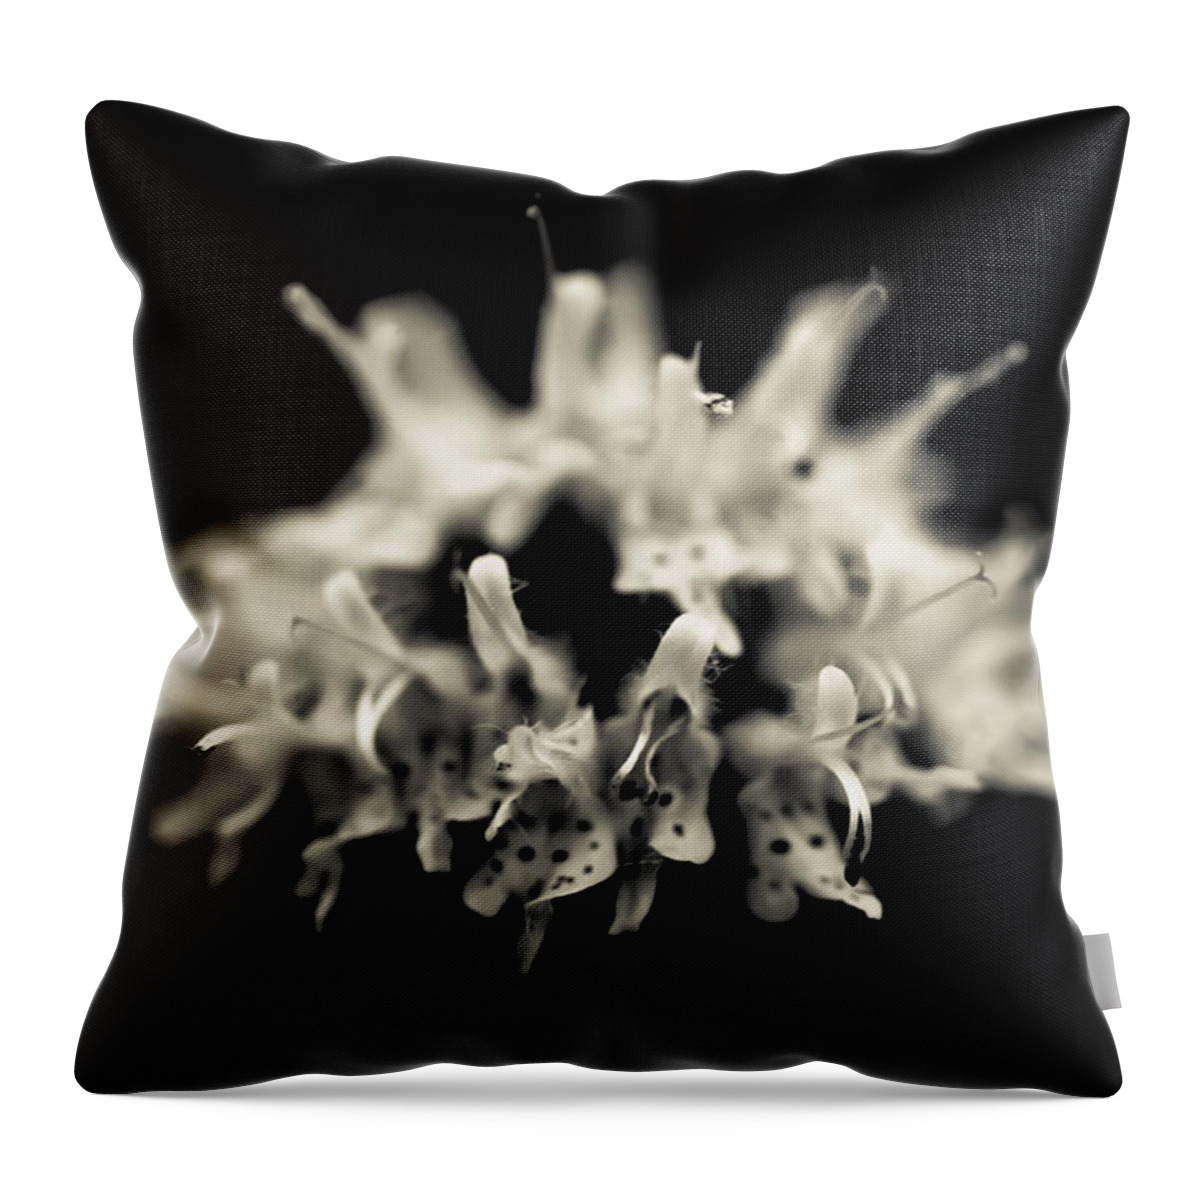 Flower Throw Pillow featuring the photograph Behind All Dreams by Shane Holsclaw